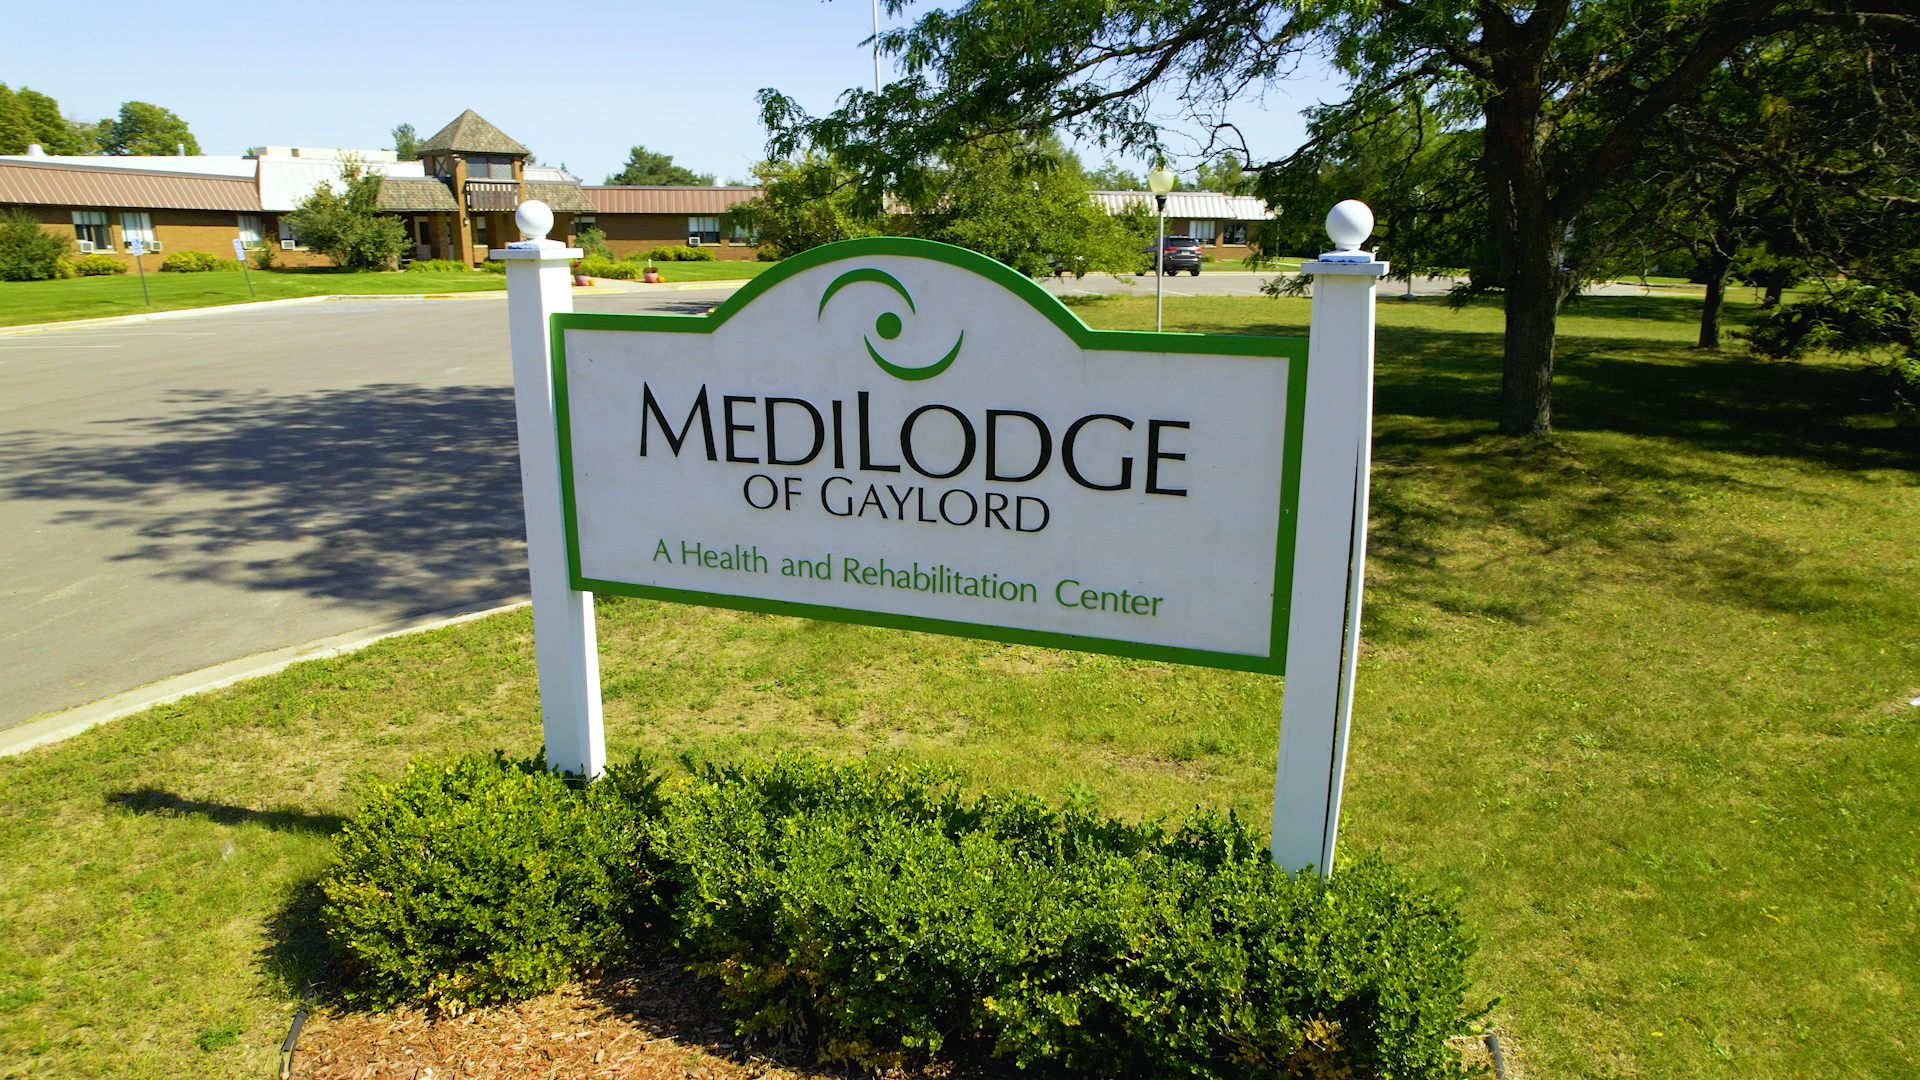 Medilodge of Gaylord